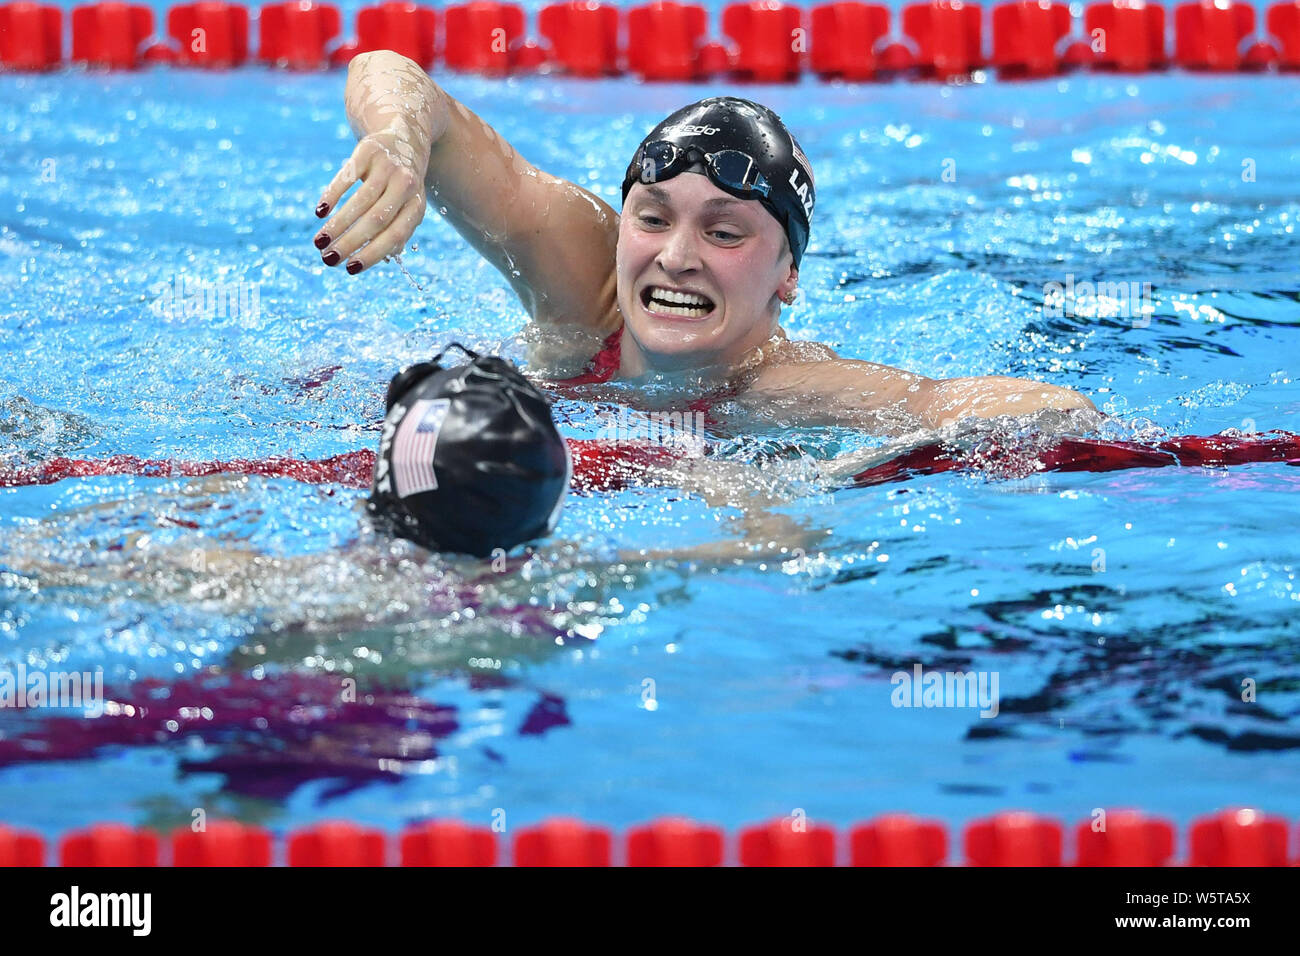 Annie Lazor of the USA, right, celebrates after winning the Women's 200m Breaststroke Final at the 14th FINA World Swimming Championships (25m) in Han Stock Photo